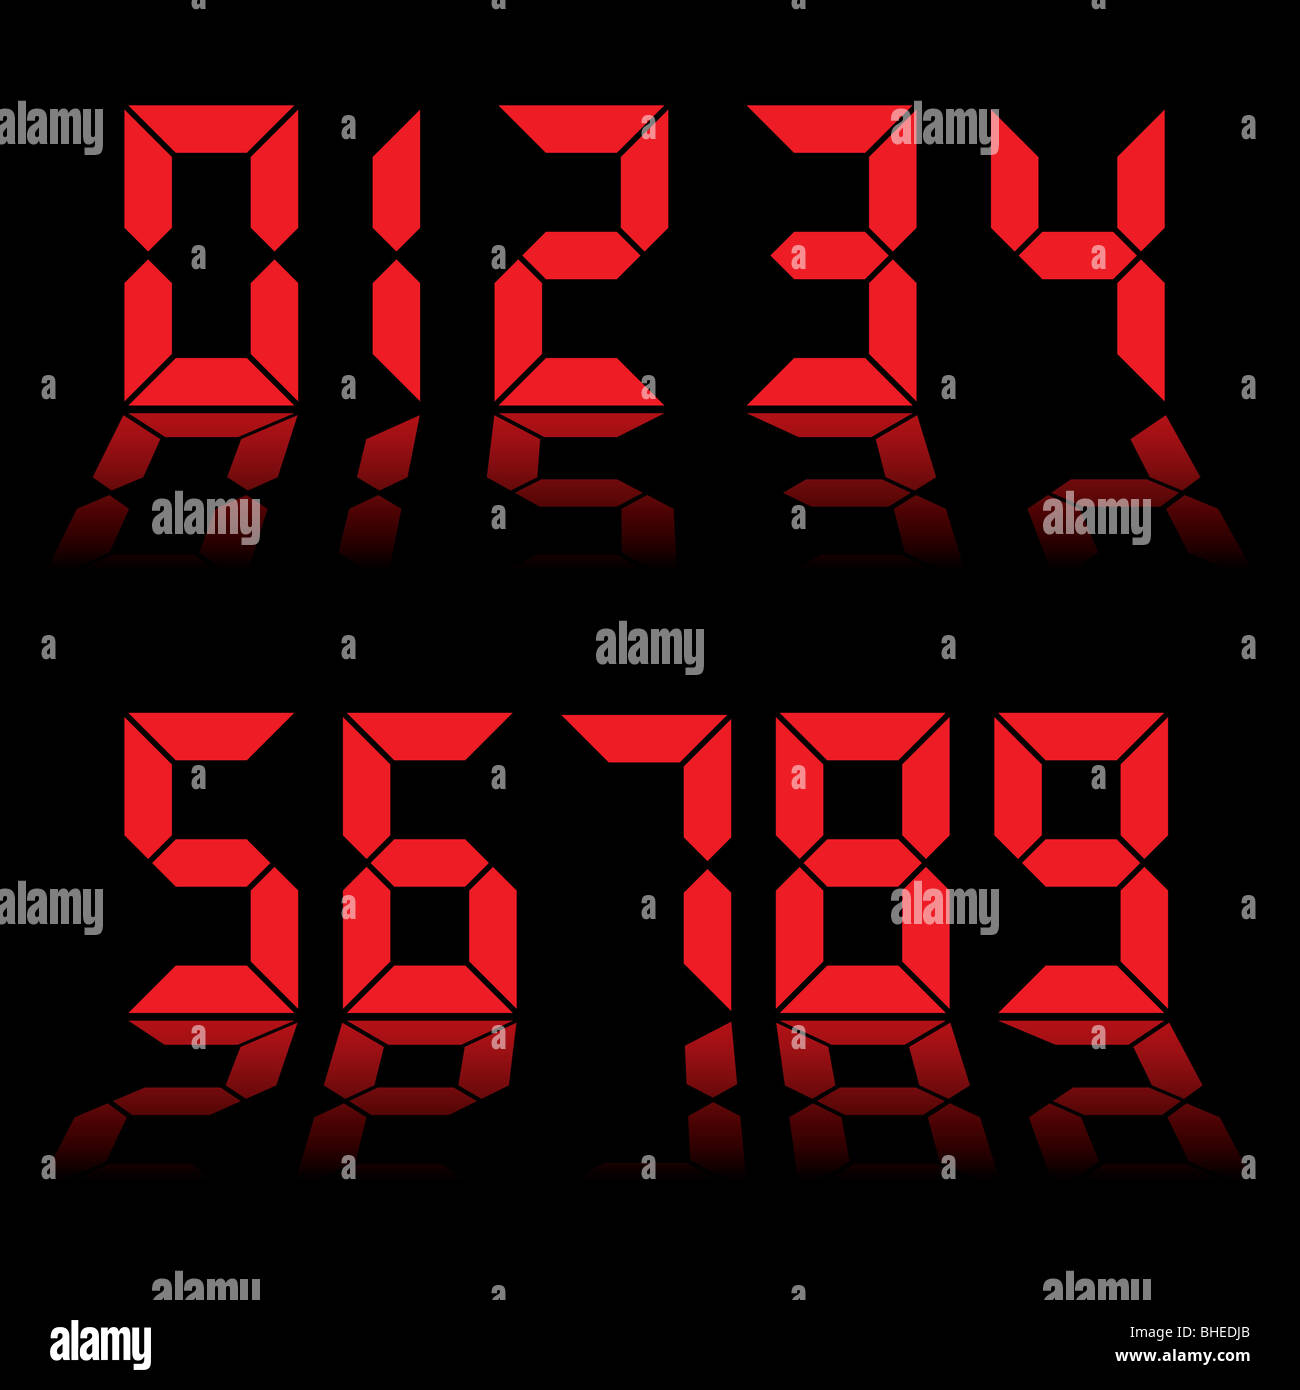 Red digital clock readout with numbers reflected in black background Stock Photo